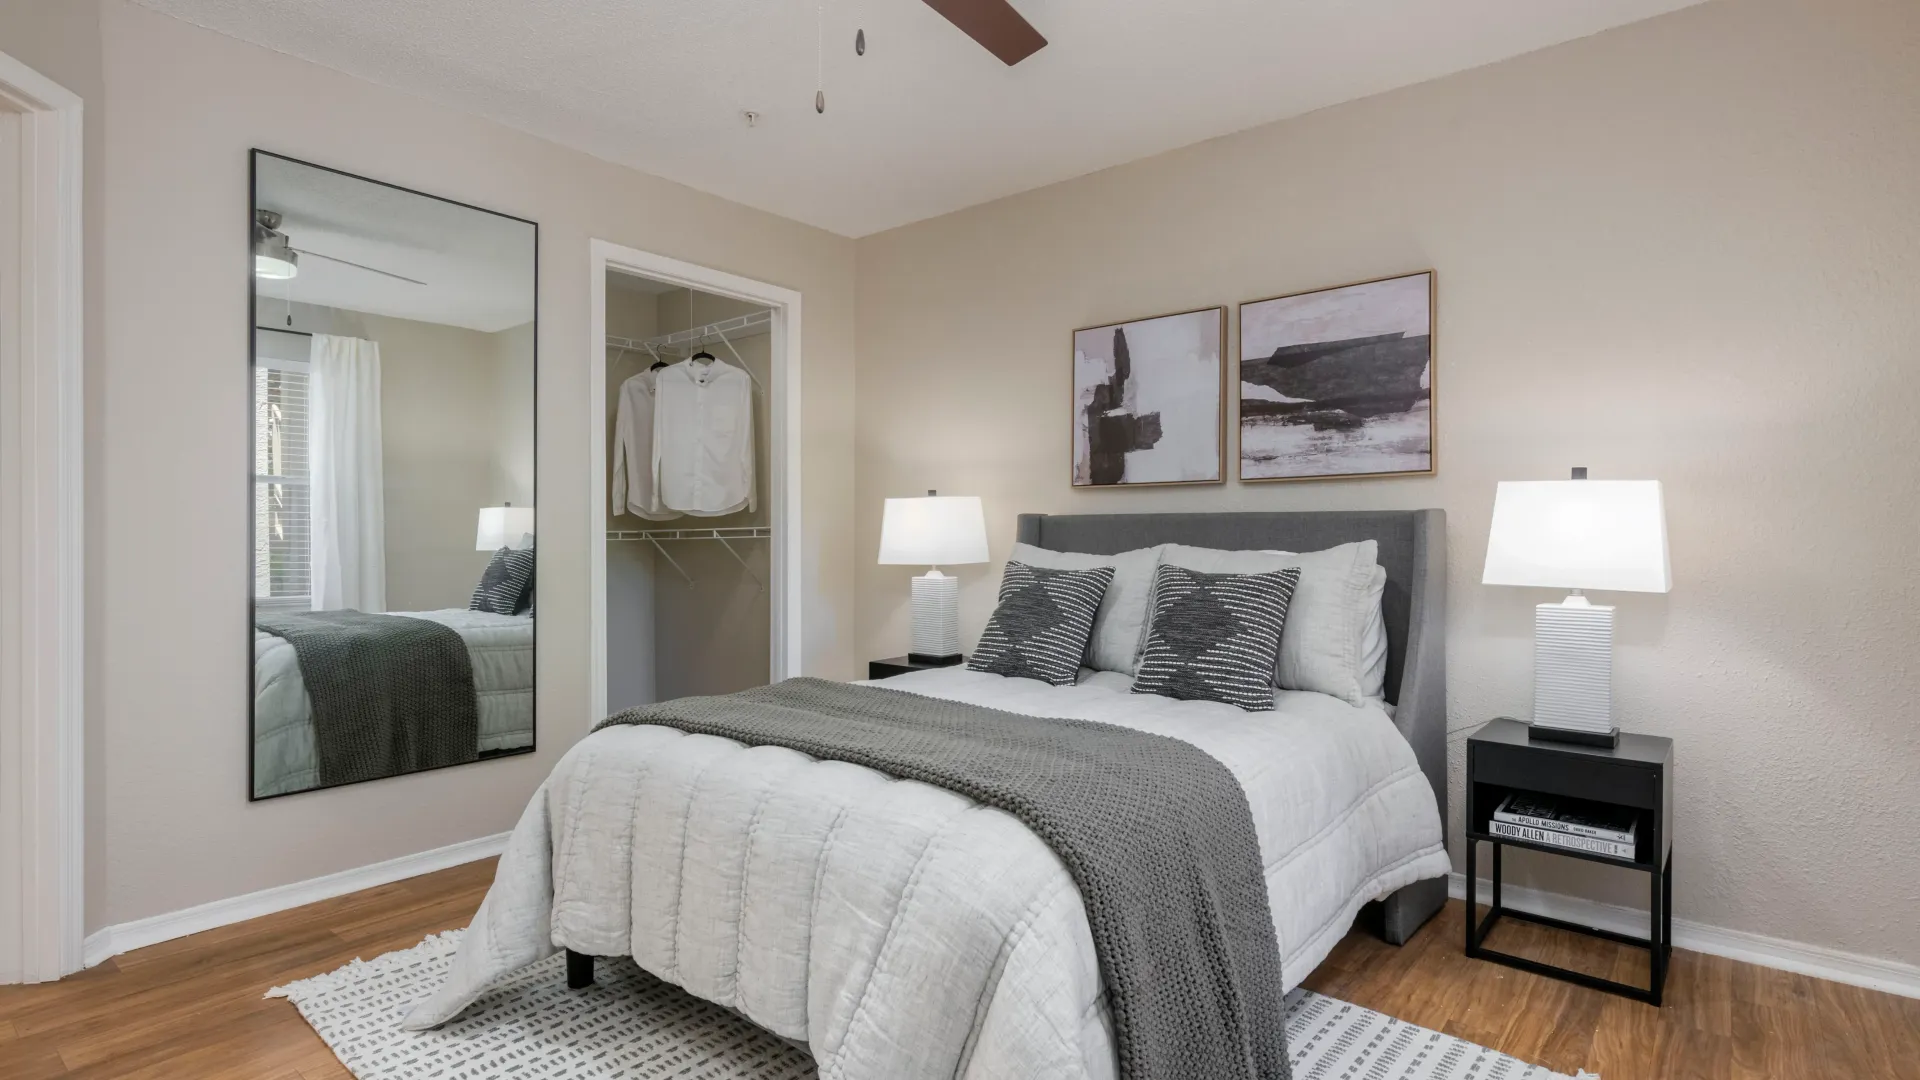 The perfect guest bedroom set up complete with their own walk-in closet and connecting bathroom.  